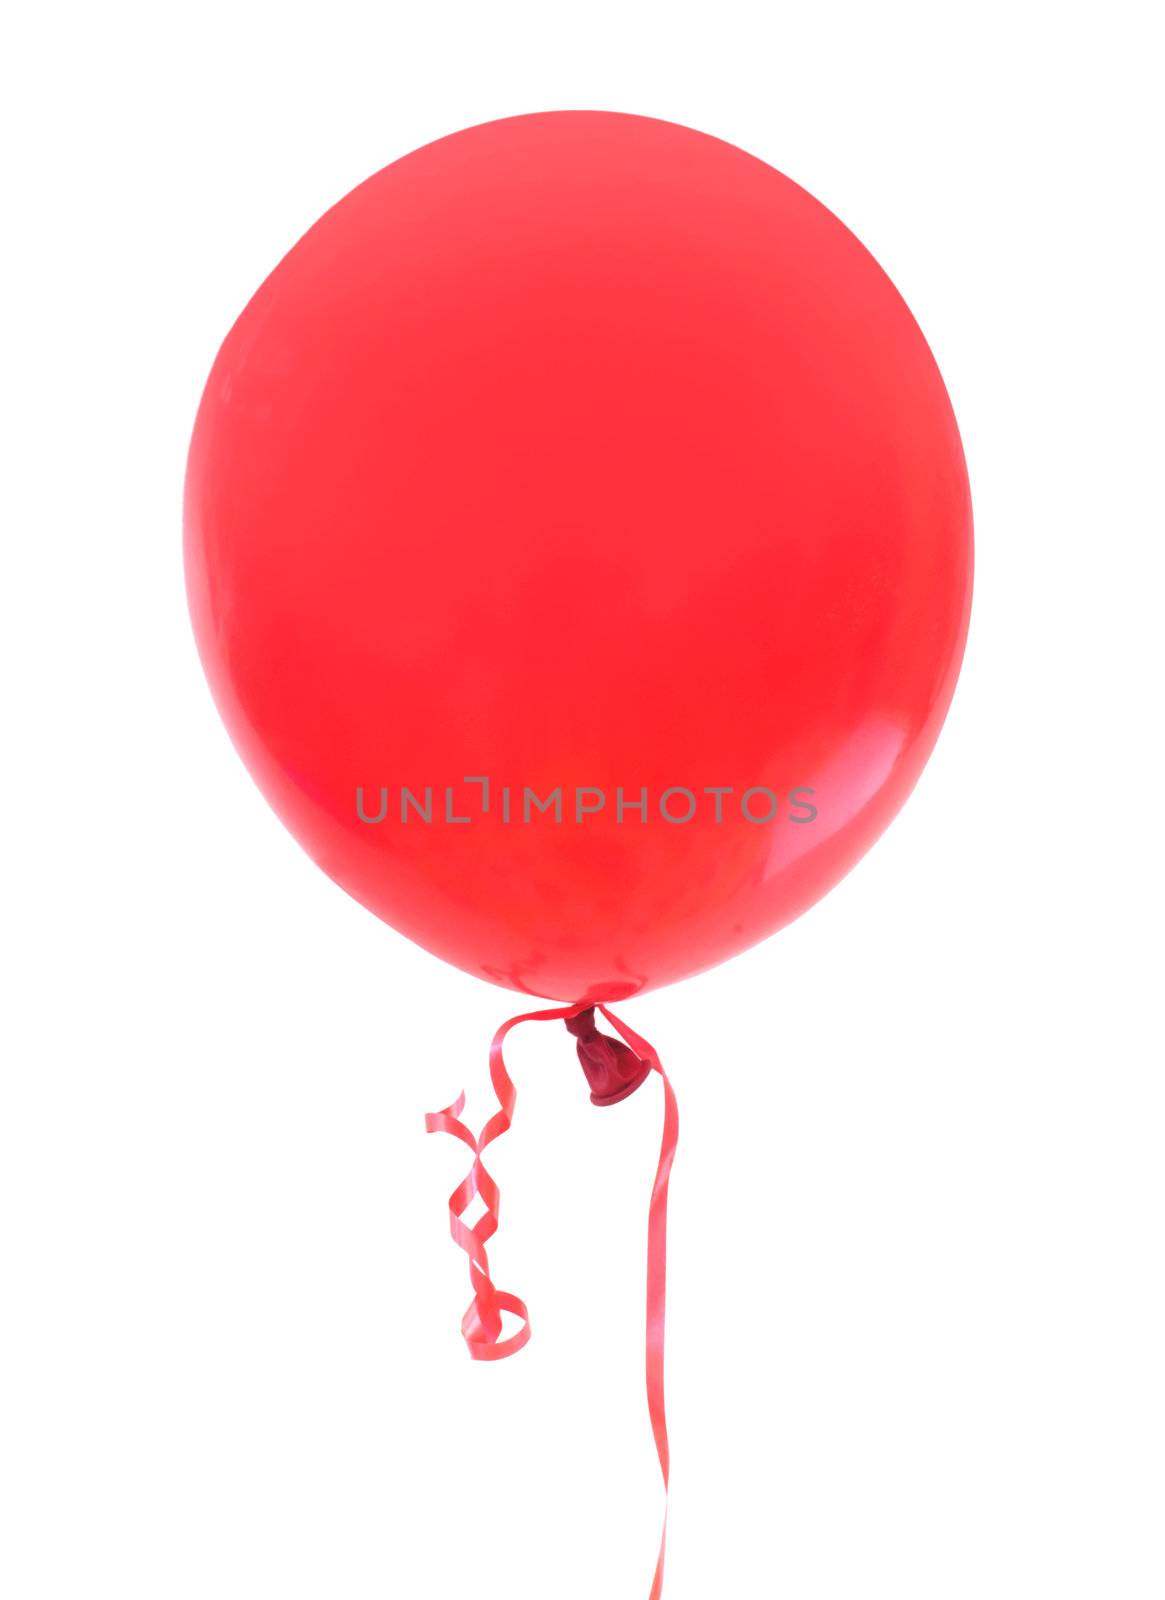 Red balloon floating against a white background